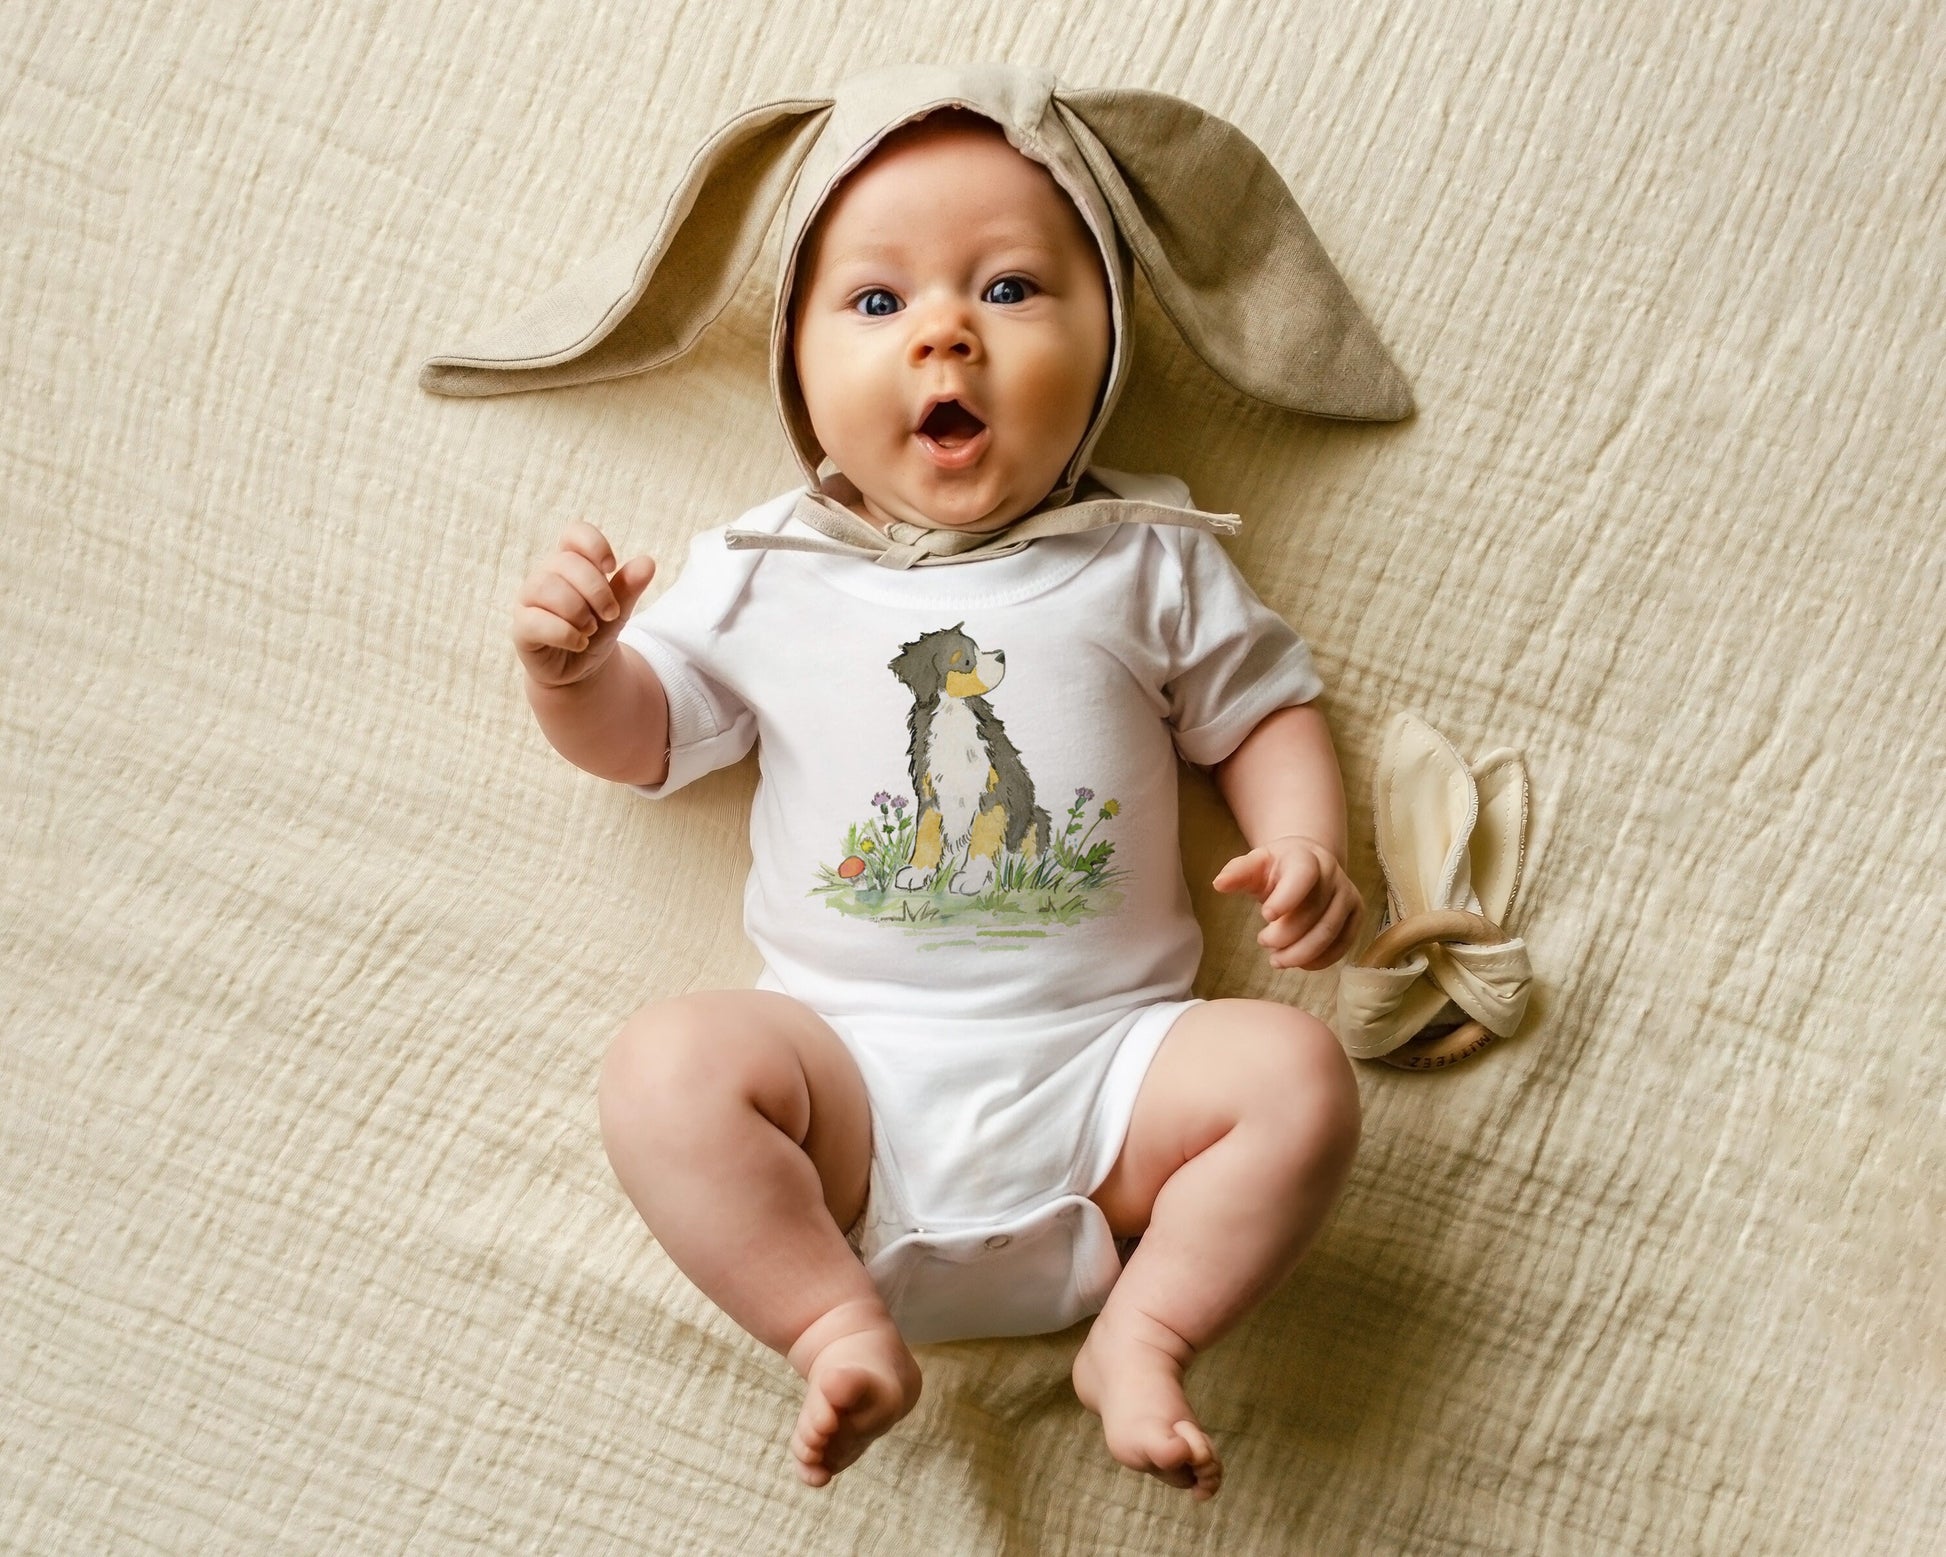 White infant bodysuit with artwork of a cute Bernese Mountain Dog on it worn by a baby.